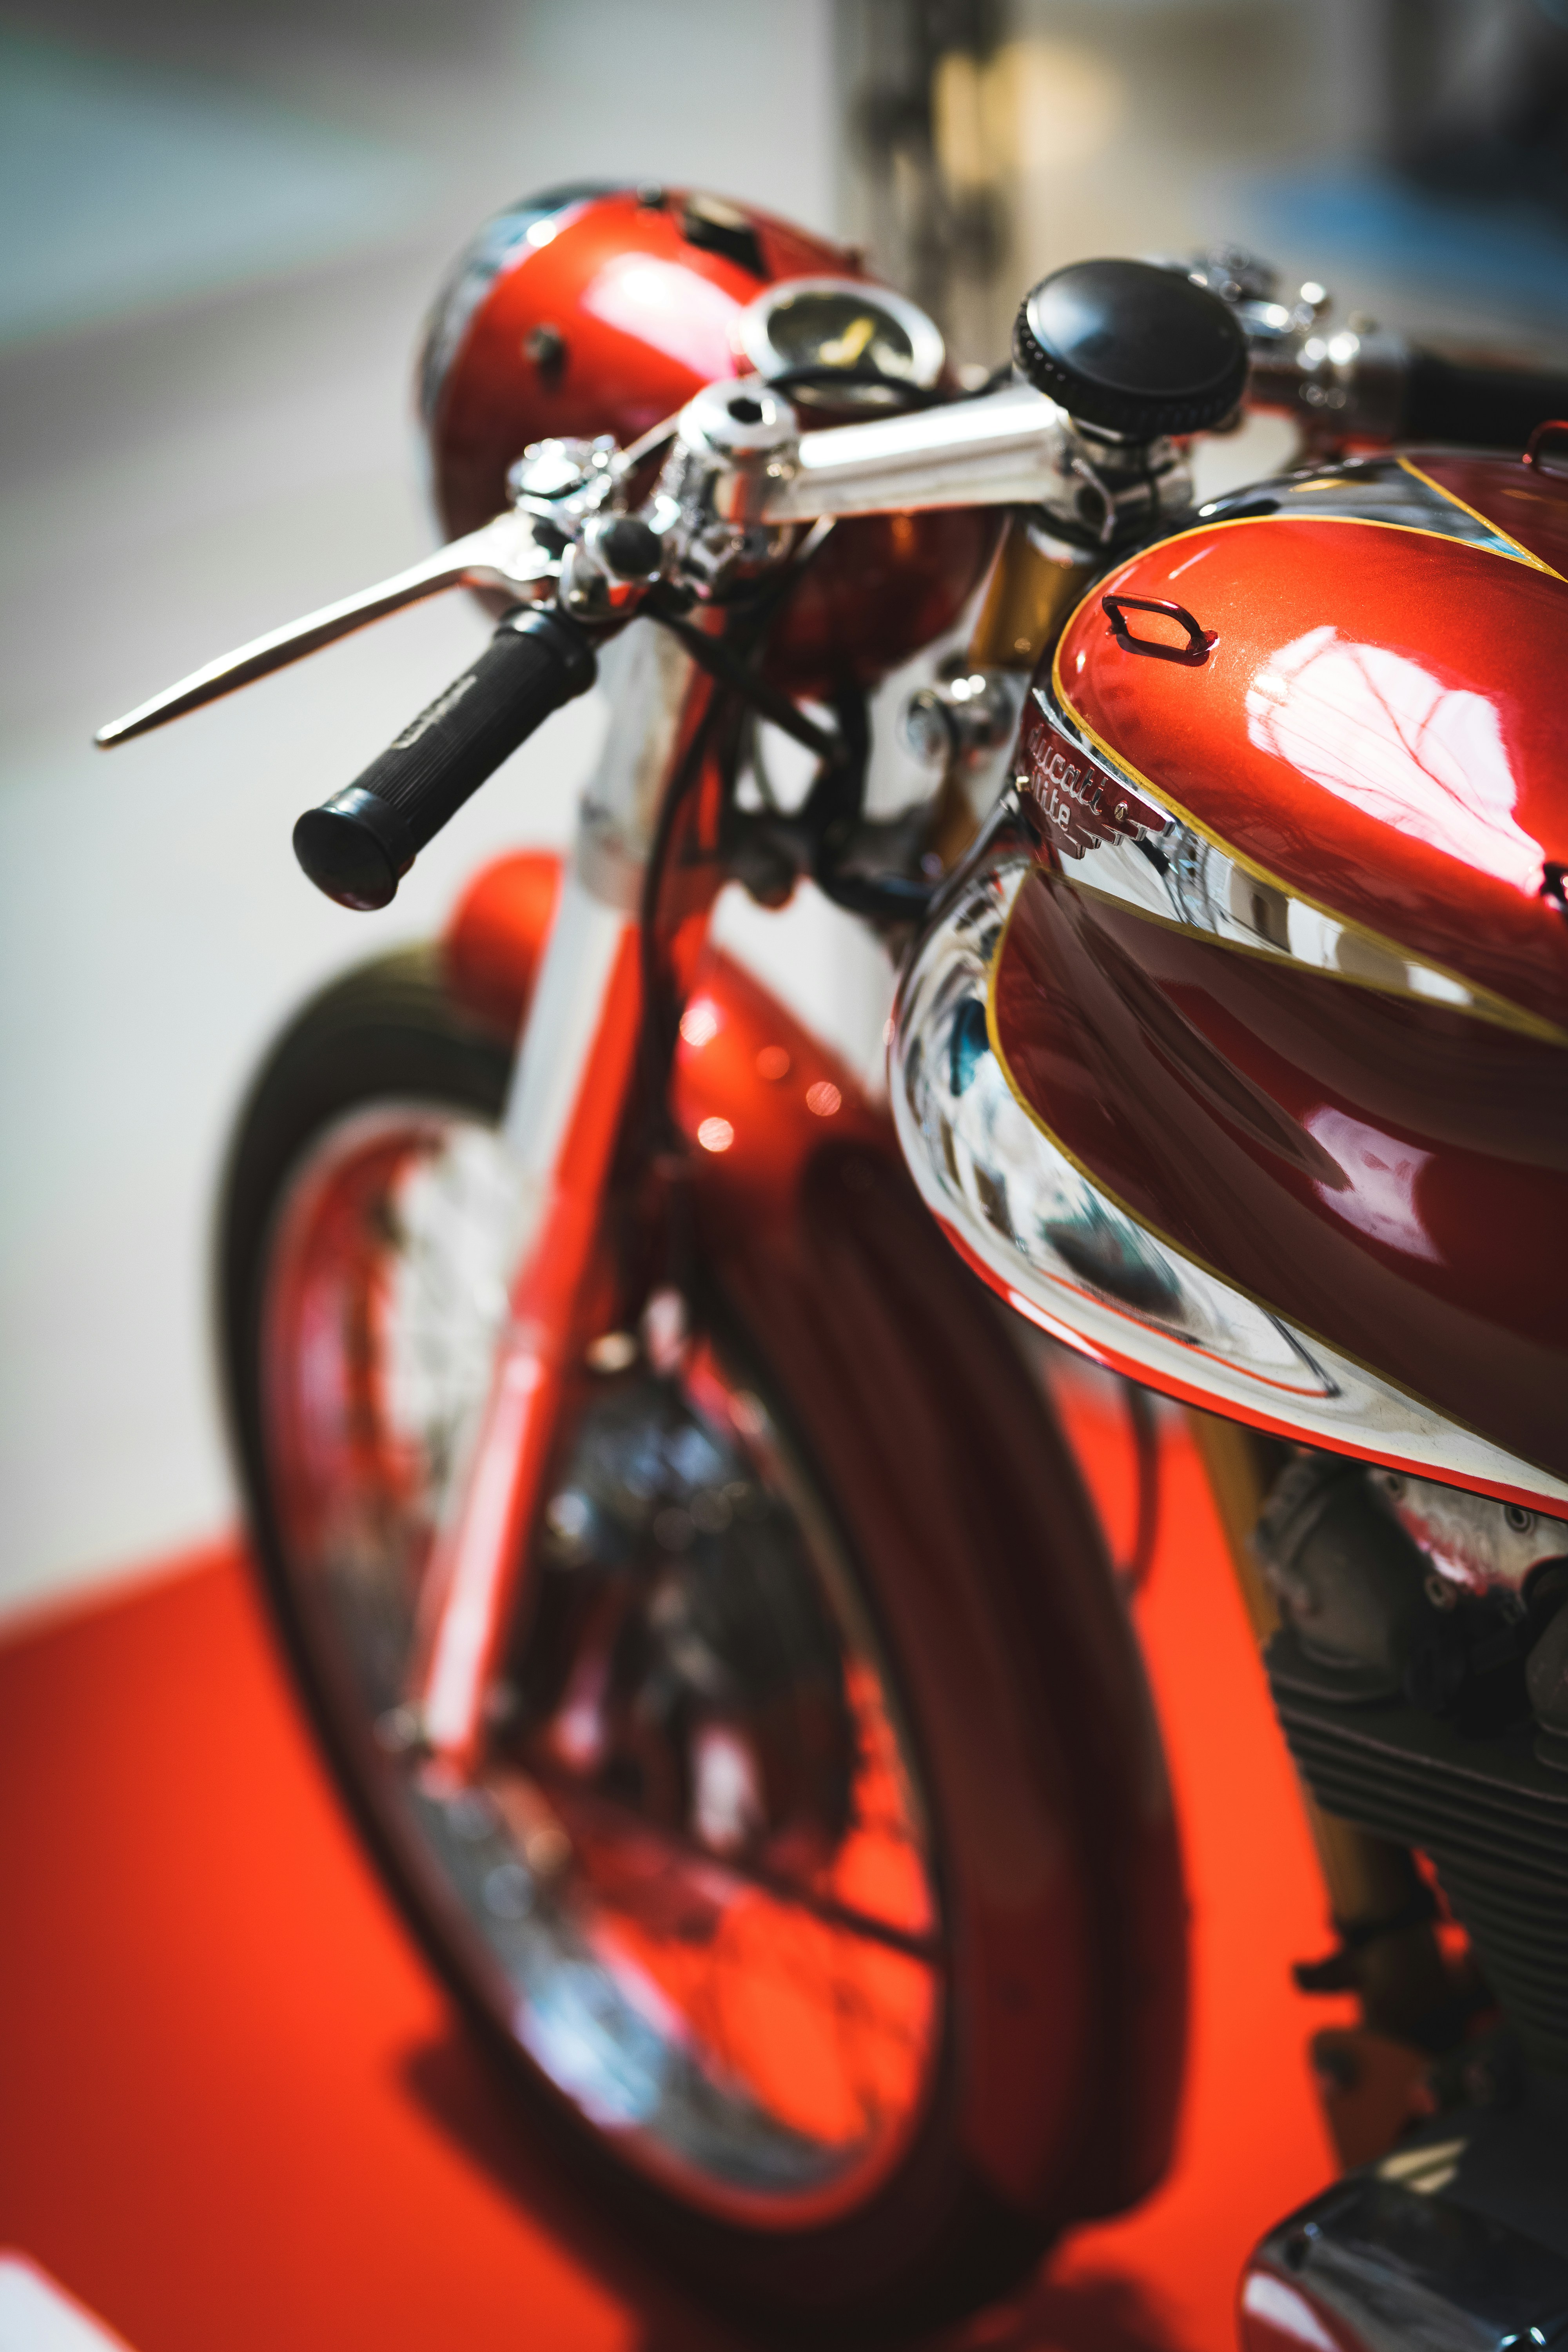 Choose from a curated selection of motorcycle photos. Always free on Unsplash.